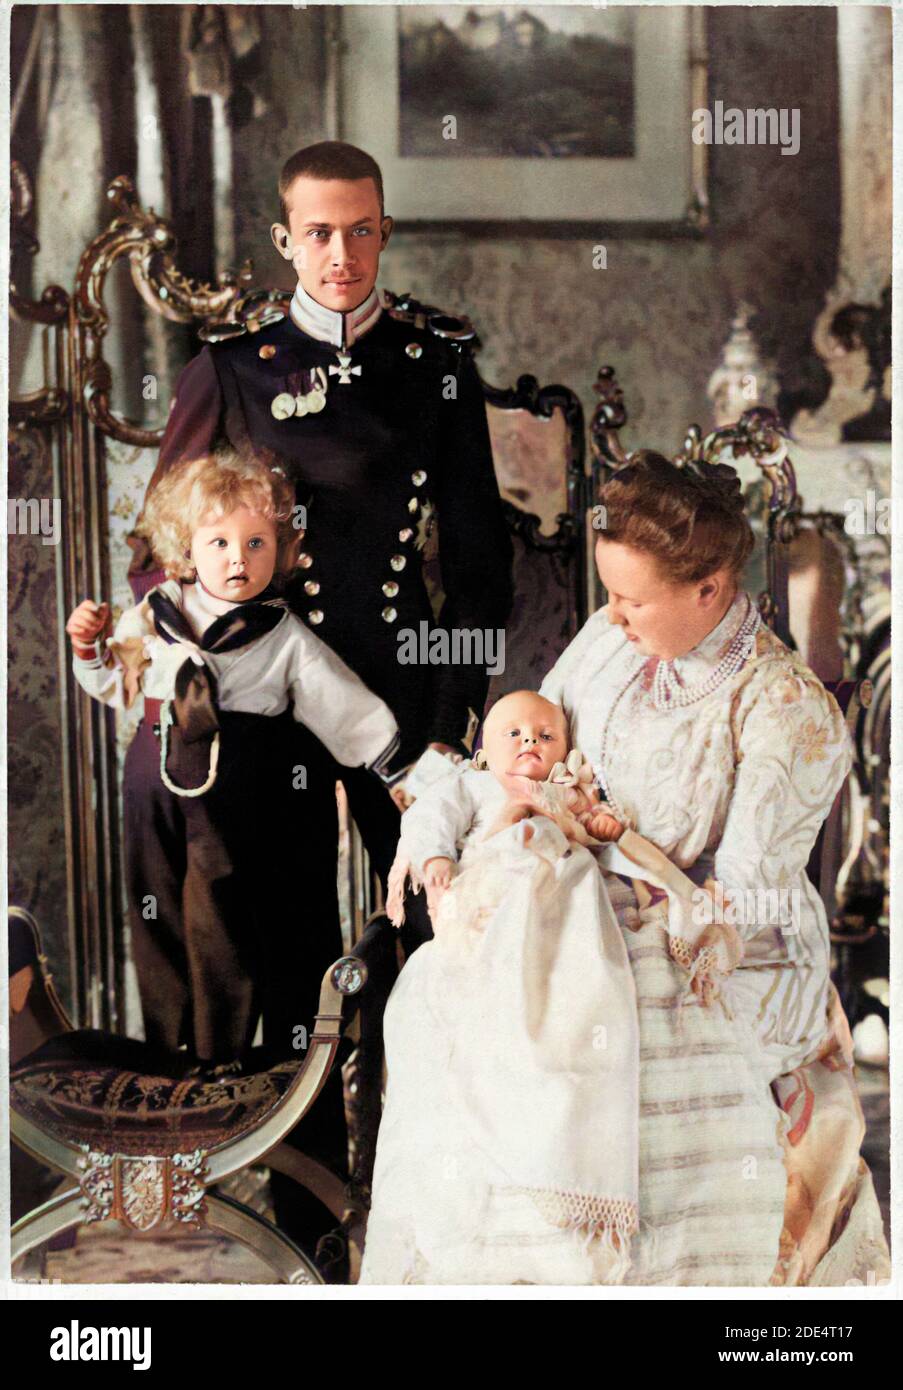 1902 , april, Potsdam , Prussia , GERMANY : The german prince Wilhelm FRIEDRICH Hermann Otto Von WIED ( 1872 - 1945 ) with wife PAULINE Von WURTTEMBERG ( 1877 - 1965 ) and sons: HERMANN ( 1899 - 1941, later married with counteess Maria Antonia Zu Stilberg-Wernigerode ) and DIETRICH ( 1901 - 1976 , later married with countess Julie Grote ) . Wilhelm Friedrich was the son of Wilhelm Adolph von WIED ( 1845 - 1907 ) and the princess of Holland  Marie Wilhelmine Van ORANGE NASSAU DIETZ ( 1841 - 1910 ), daughter of Friedrich I Orange-Nassau-Dietz OF NETHERLANDS and Louise of Prussia ( 1808 - 1870 ), Stock Photo